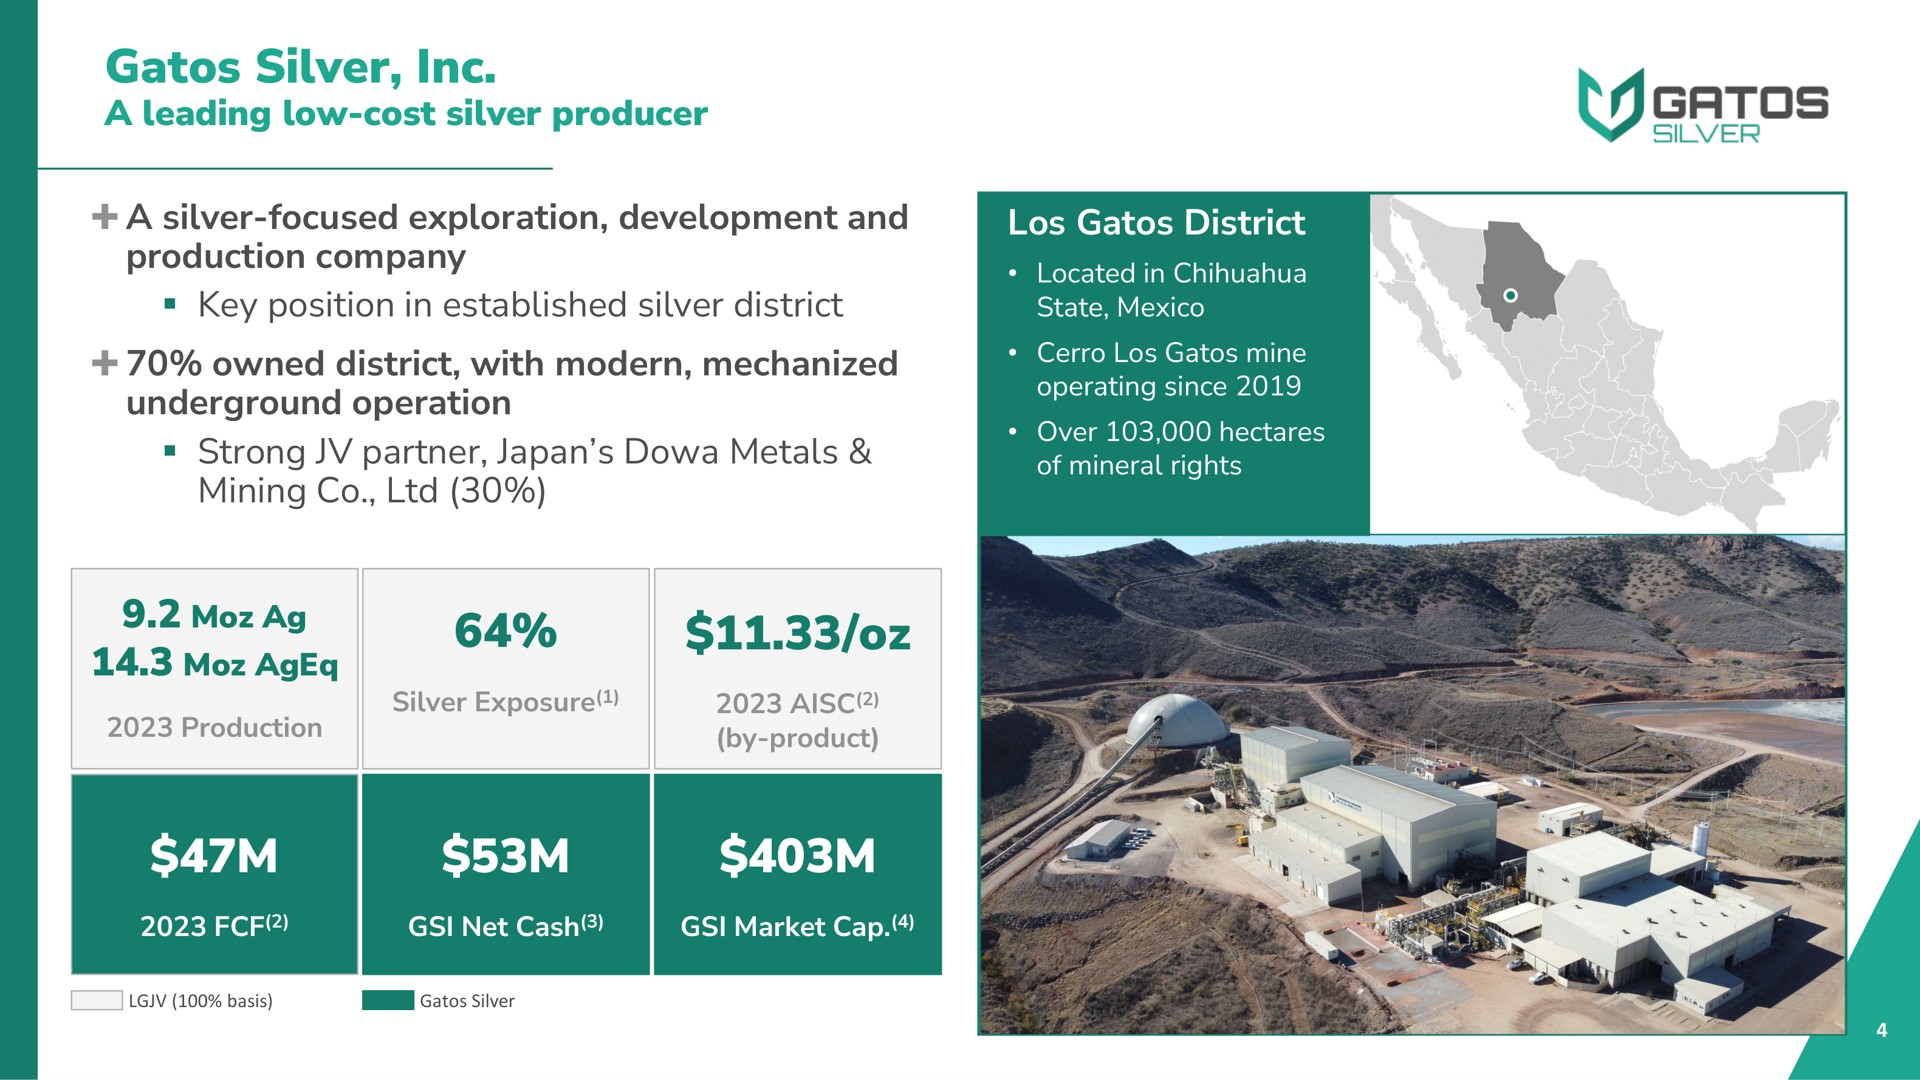 silver a leading low cost silver producer a silver focused exploration development and production company key position in established silver district owned district with modern mechanized underground operation strong partner japan metals mining district tan | Gatos Silver